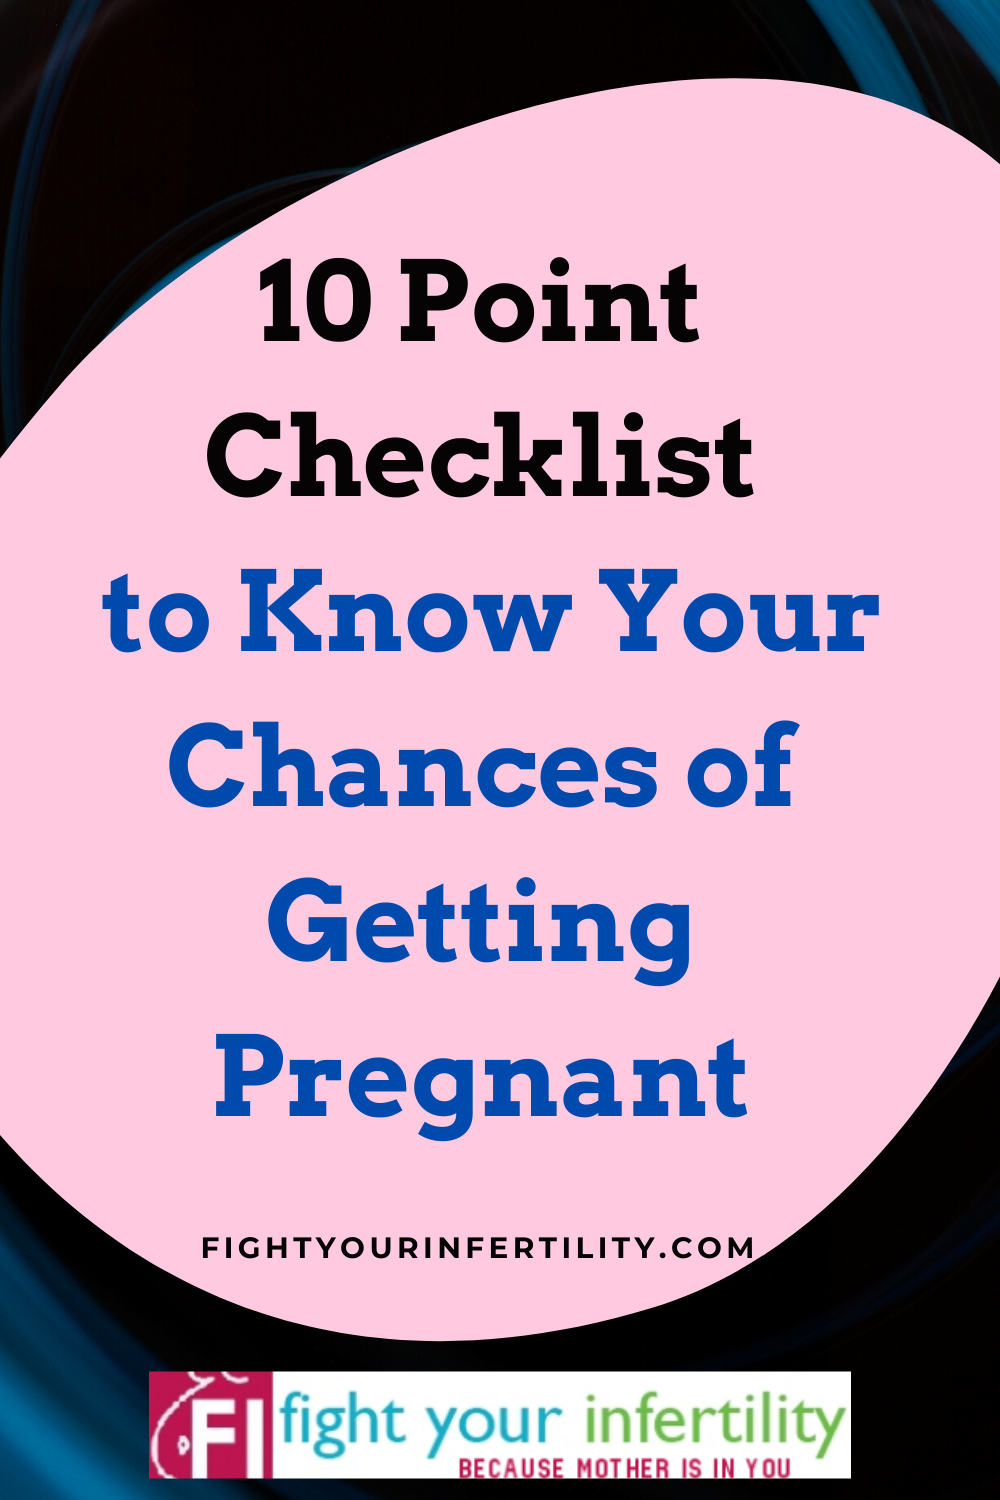 10 Point Checklist to Know Your Chances of Getting Pregnant